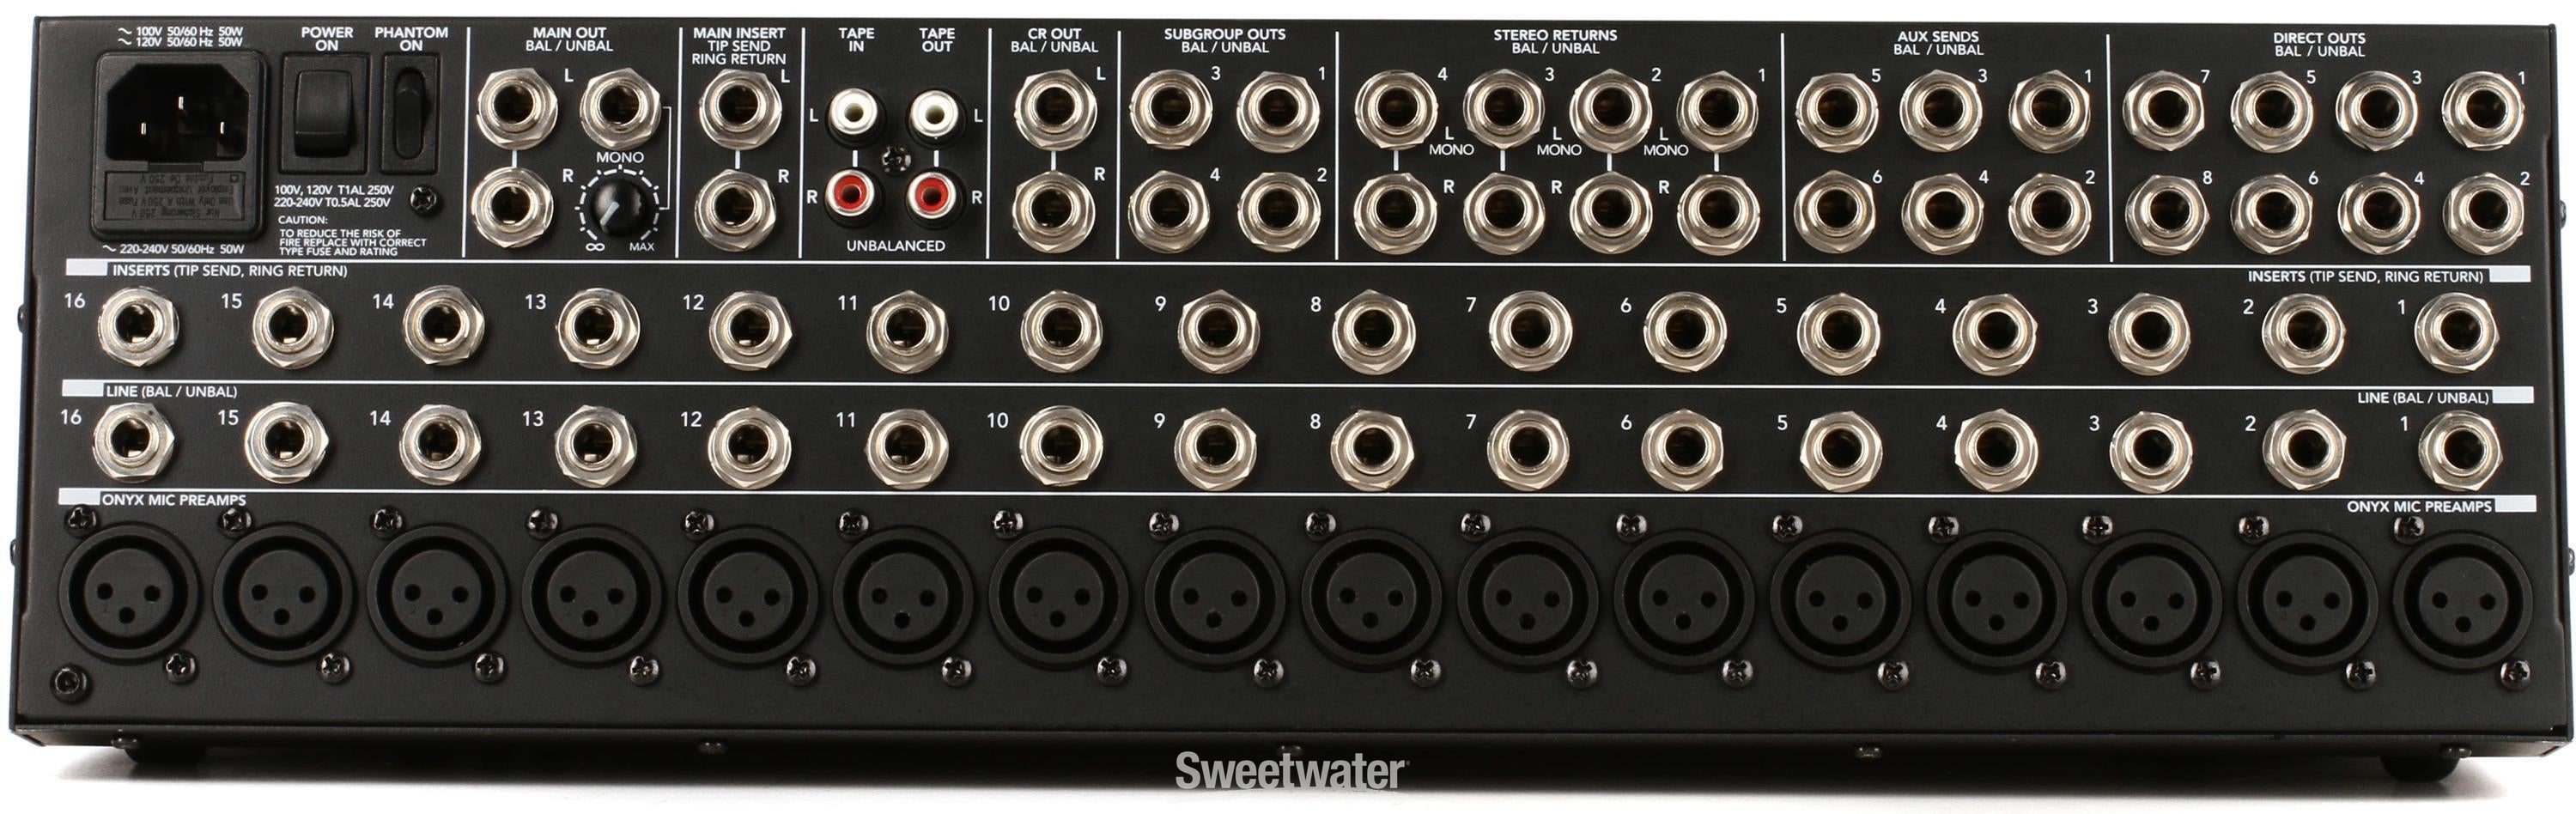 Mackie 1604VLZ4 16-channel Mixer | Sweetwater